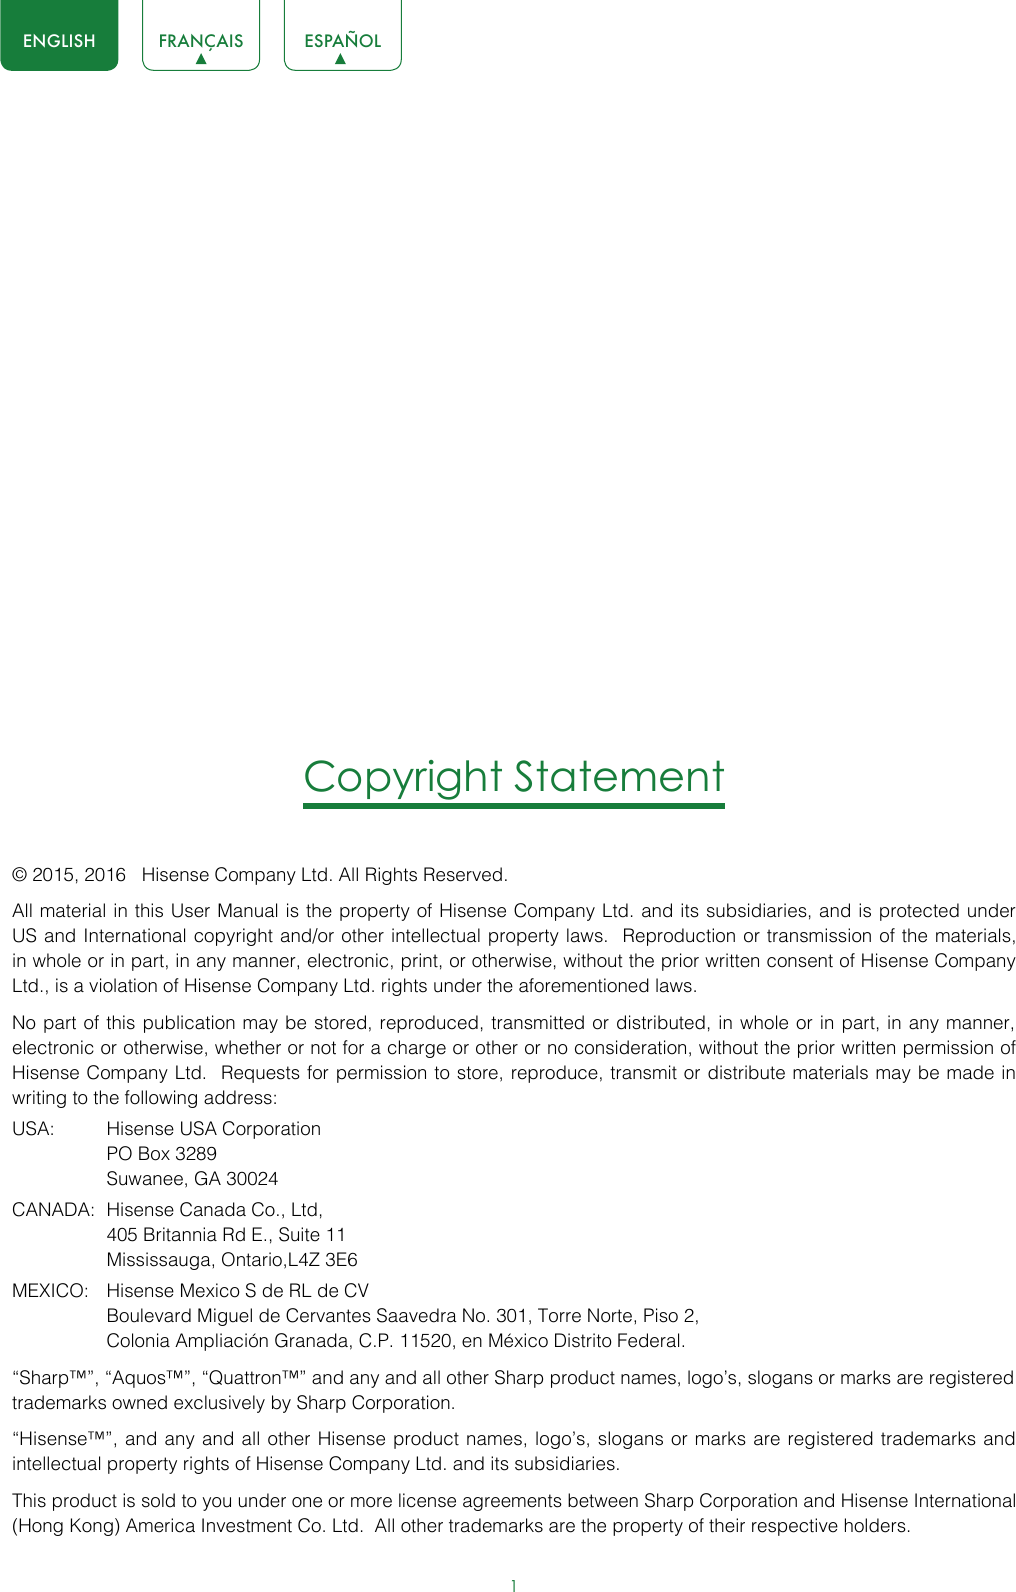 1ENGLISH FRANÇAIS ESPAÑOLCopyright Statement© 2015, 2016   Hisense Company Ltd. All Rights Reserved.All material in this User Manual is the property of Hisense Company Ltd. and its subsidiaries, and is protected under US and International copyright and/or other intellectual property laws.  Reproduction or transmission of the materials, in whole or in part, in any manner, electronic, print, or otherwise, without the prior written consent of Hisense Company Ltd., is a violation of Hisense Company Ltd. rights under the aforementioned laws. No part of this publication may be stored, reproduced, transmitted or distributed, in whole or in part, in any manner, electronic or otherwise, whether or not for a charge or other or no consideration, without the prior written permission of Hisense Company Ltd.  Requests for permission to store, reproduce, transmit or distribute materials may be made in writing to the following address:USA:  Hisense USA Corporation  PO Box 3289  Suwanee, GA 30024CANADA:  Hisense Canada Co., Ltd,  405 Britannia Rd E., Suite 11  Mississauga, Ontario,L4Z 3E6MEXICO:  Hisense Mexico S de RL de CV  Boulevard Miguel de Cervantes Saavedra No. 301, Torre Norte, Piso 2,  Colonia Ampliación Granada, C.P. 11520, en México Distrito Federal.“Sharp™”, “Aquos™”, “Quattron™” and any and all other Sharp product names, logo’s, slogans or marks are registered trademarks owned exclusively by Sharp Corporation.“Hisense™”, and any and all other Hisense product names, logo’s, slogans or marks are registered trademarks and intellectual property rights of Hisense Company Ltd. and its subsidiaries. This product is sold to you under one or more license agreements between Sharp Corporation and Hisense International (Hong Kong) America Investment Co. Ltd.  All other trademarks are the property of their respective holders.